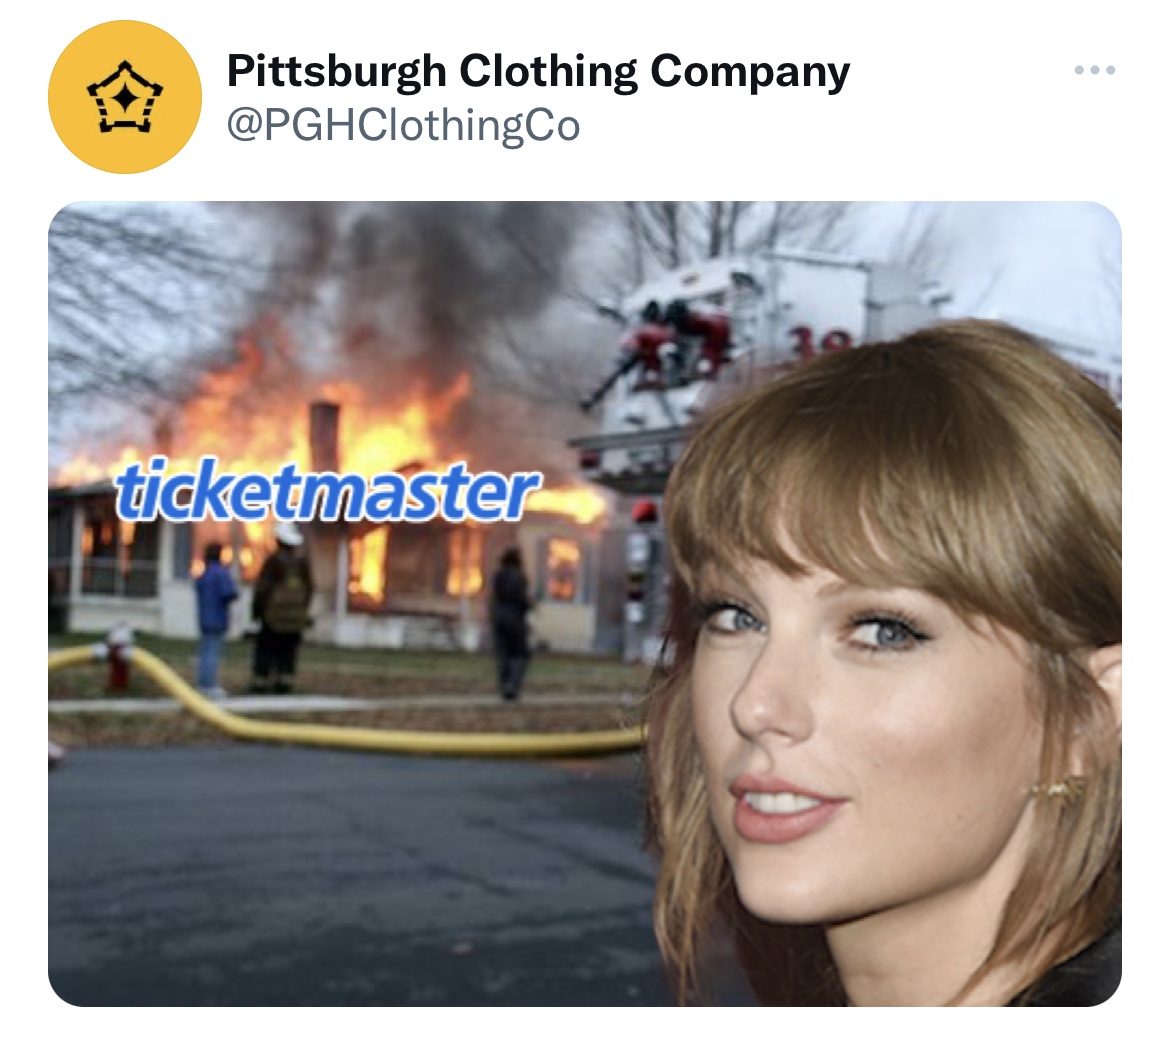 Tweets dunking on celebs - disaster girl - Pittsburgh Clothing Company ticketmaster